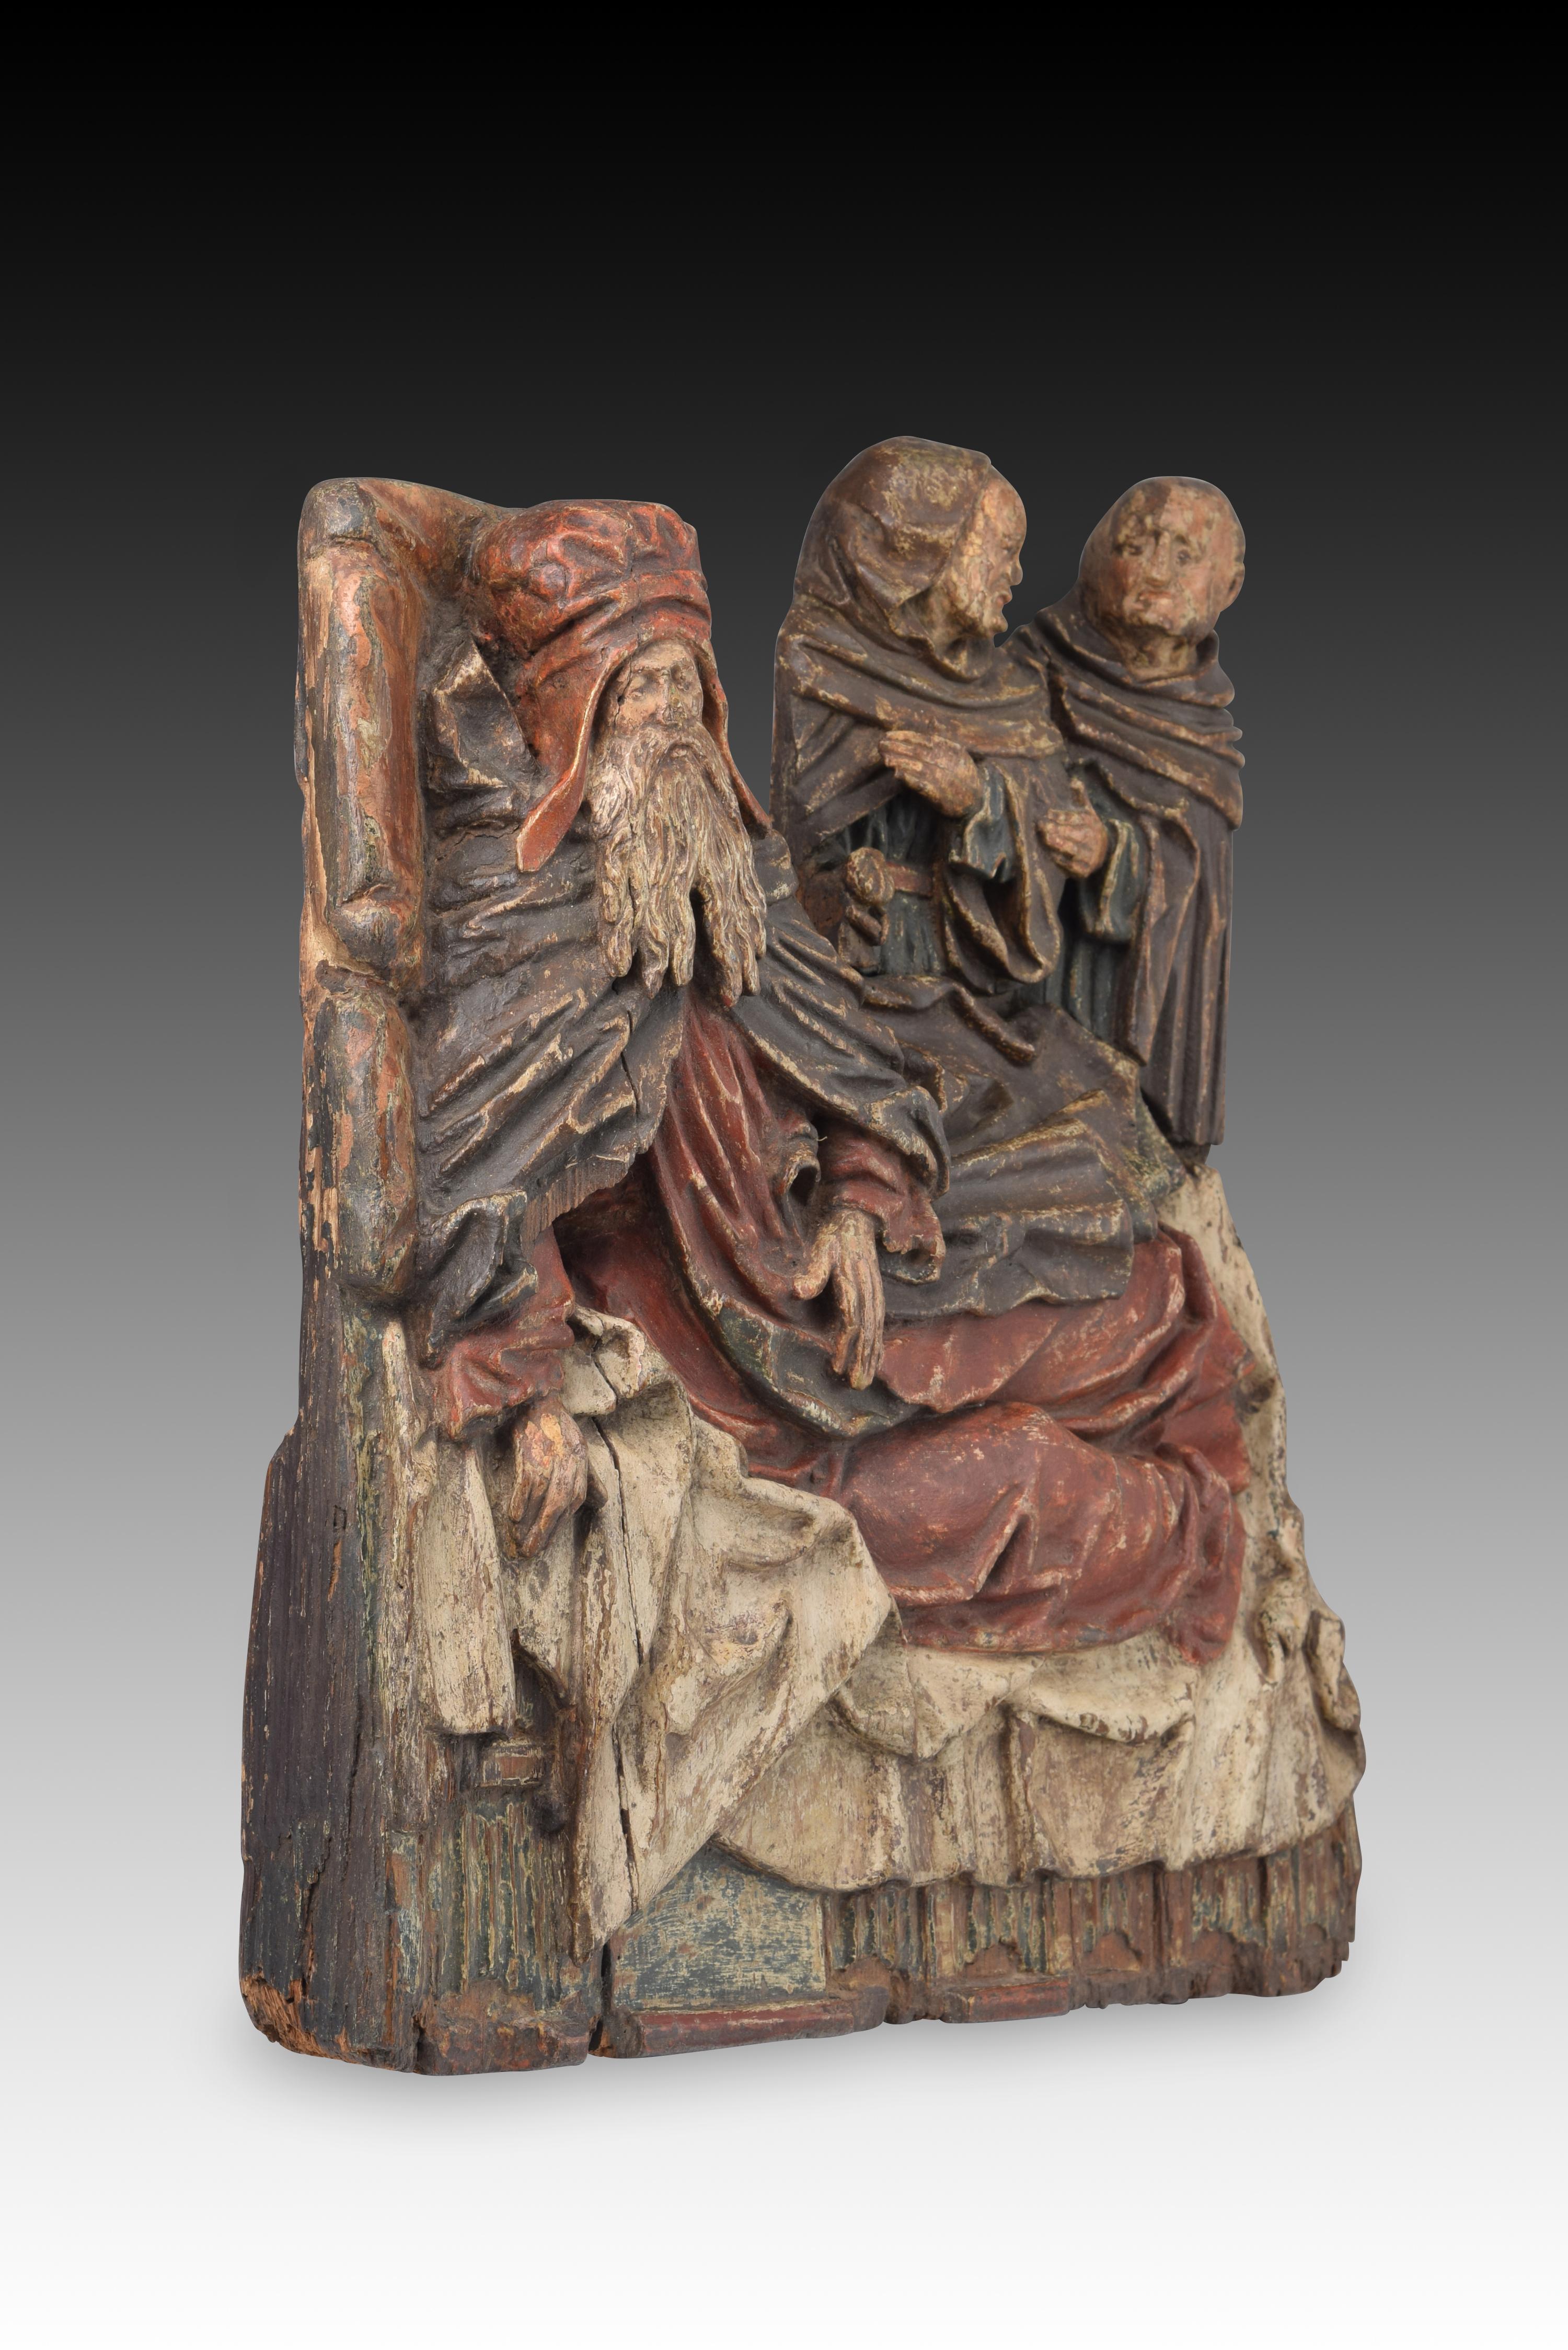 Dream of a saint. Carved and polychrome wood. Flemish school, 16th century. 
Relief made of carved and polychrome wood that shows an old man with a particular headdress (reminiscent of some chaperones) lying on a bed and accompanied by two friars